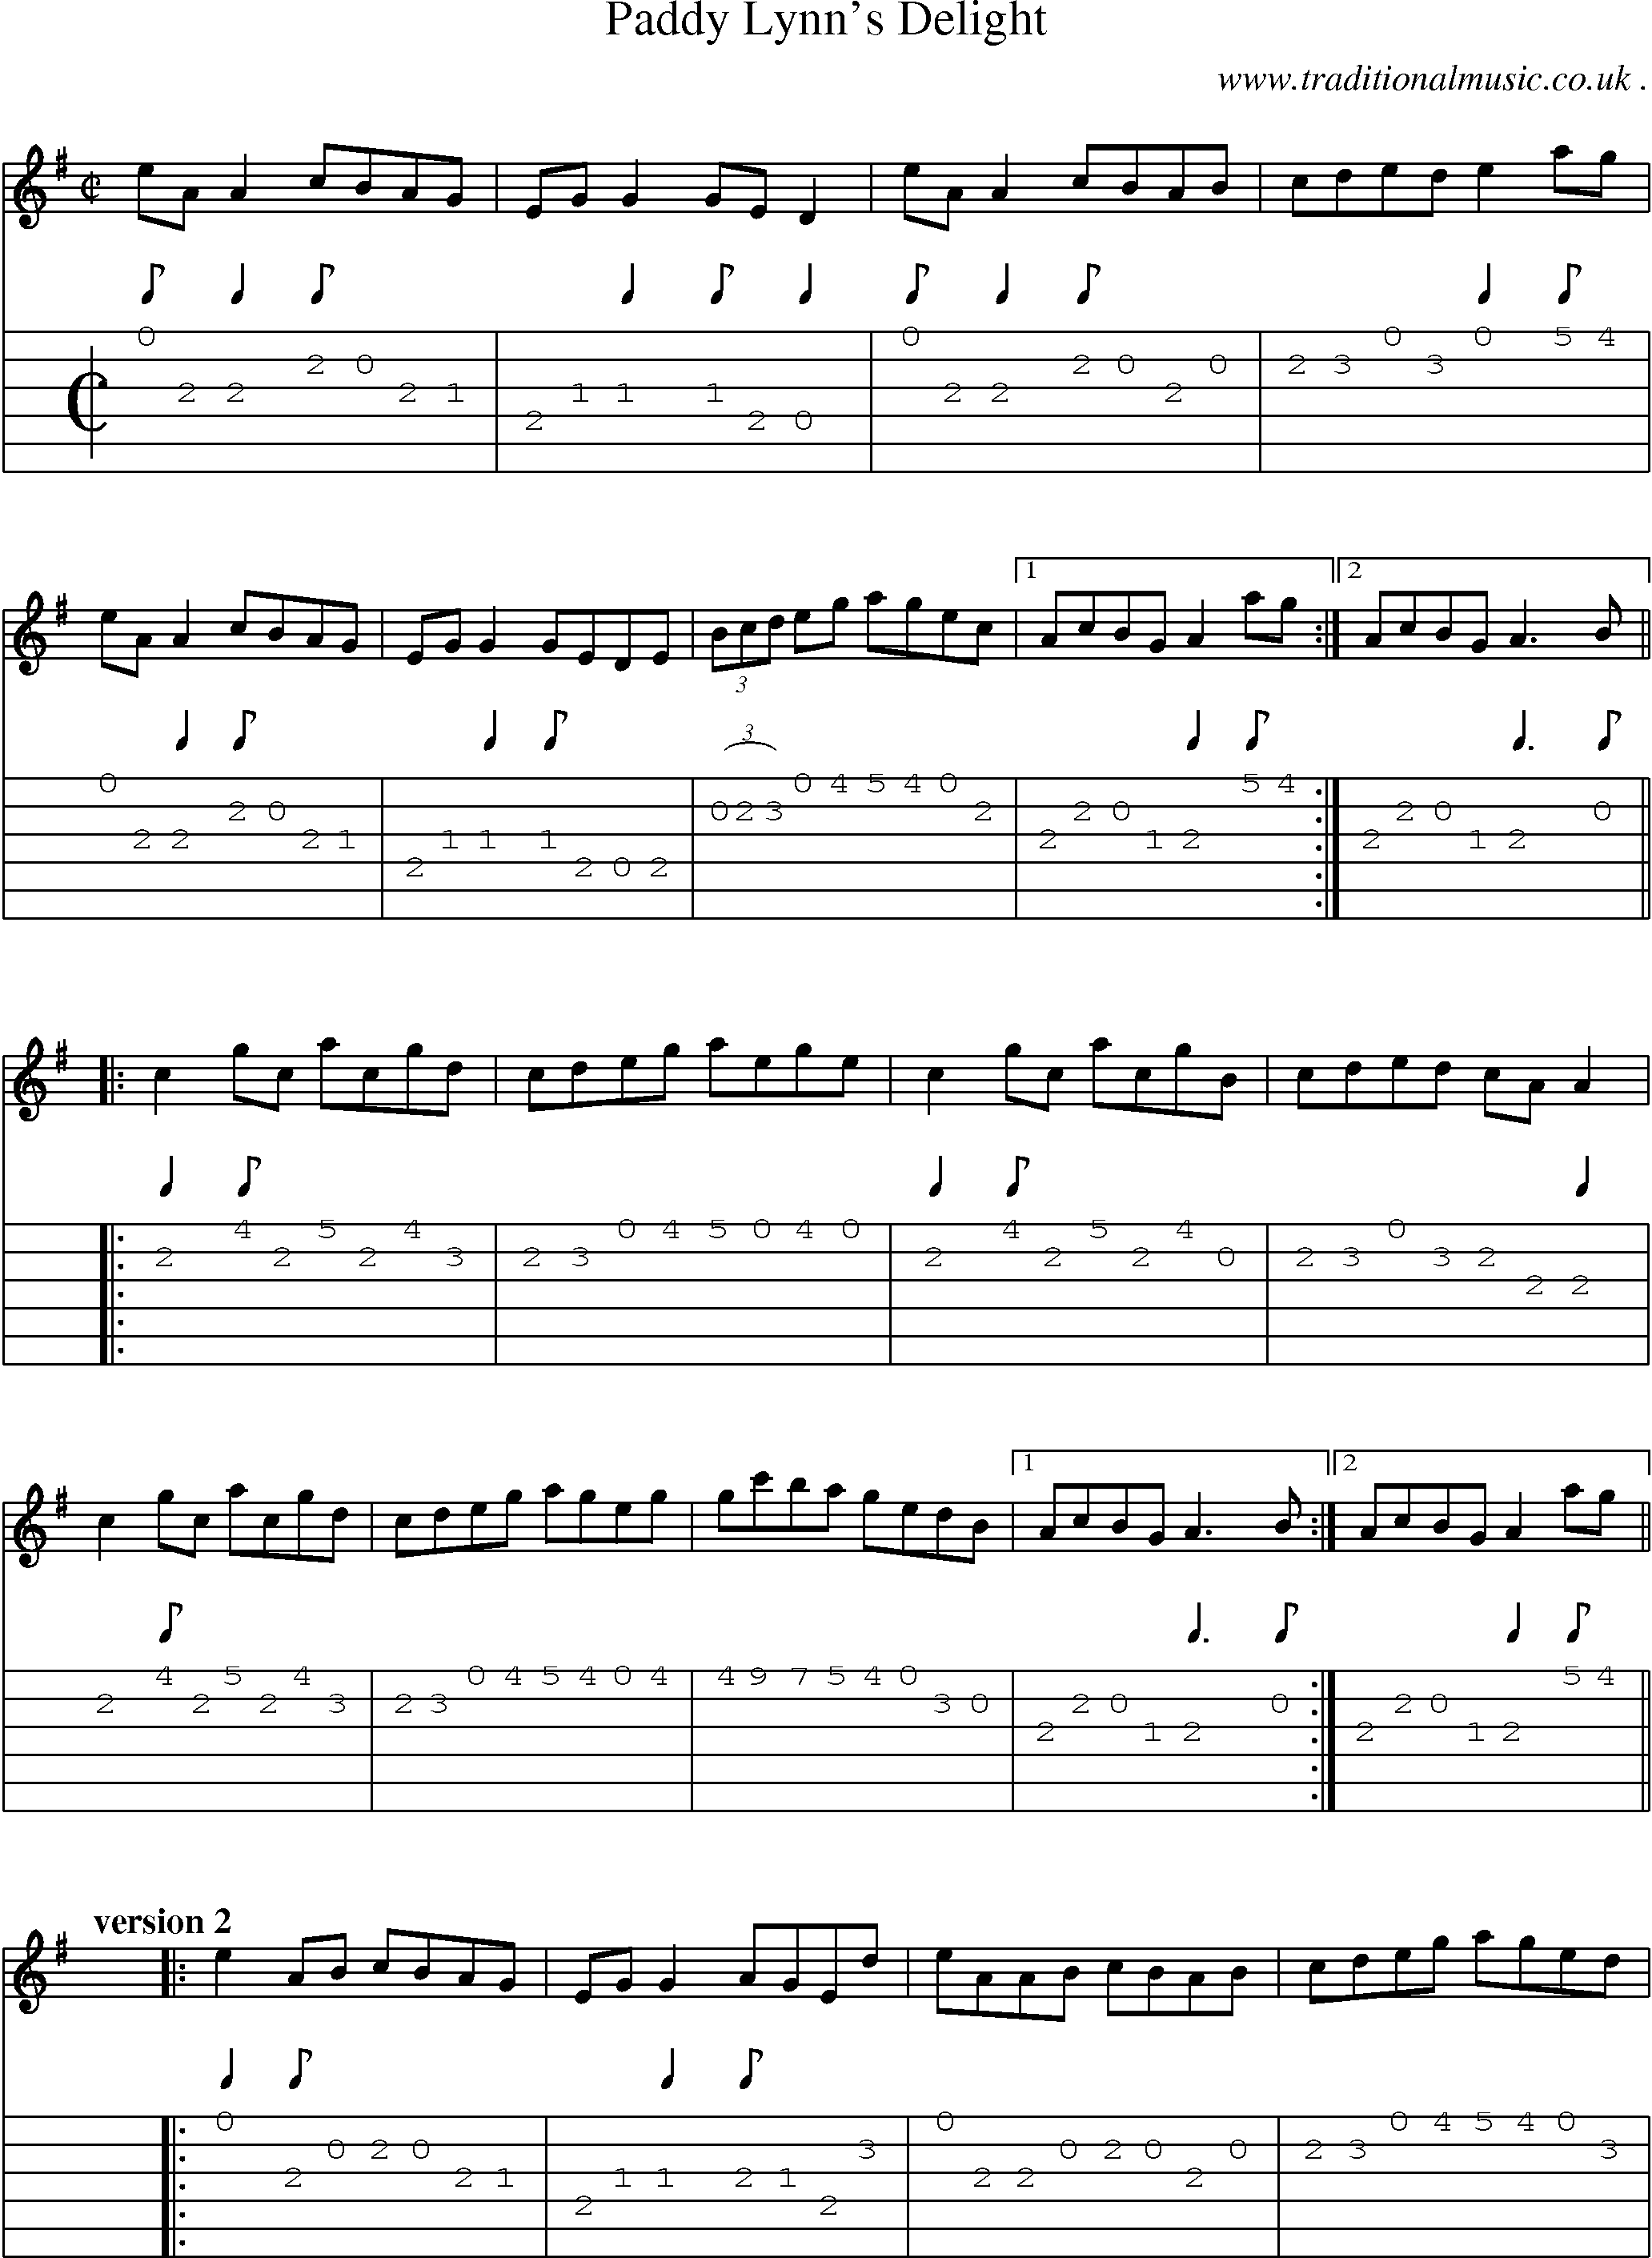 Sheet-Music and Guitar Tabs for Paddy Lynns Delight